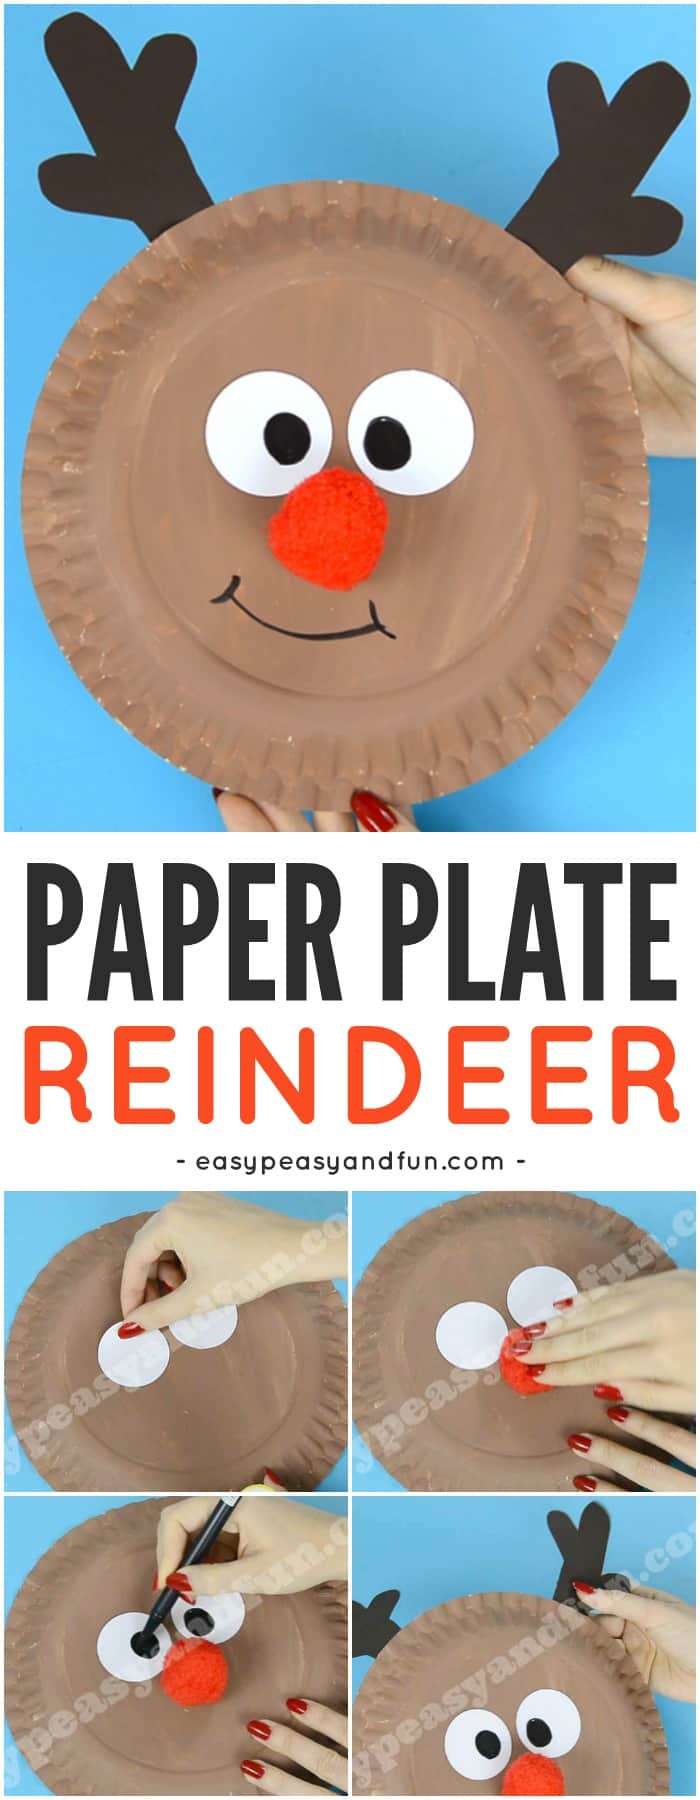 Cute-Reindeer-Paper-Plate-Craft-for-Kids.-Fun-Christmas-Activity-for-Kids-to-Make.